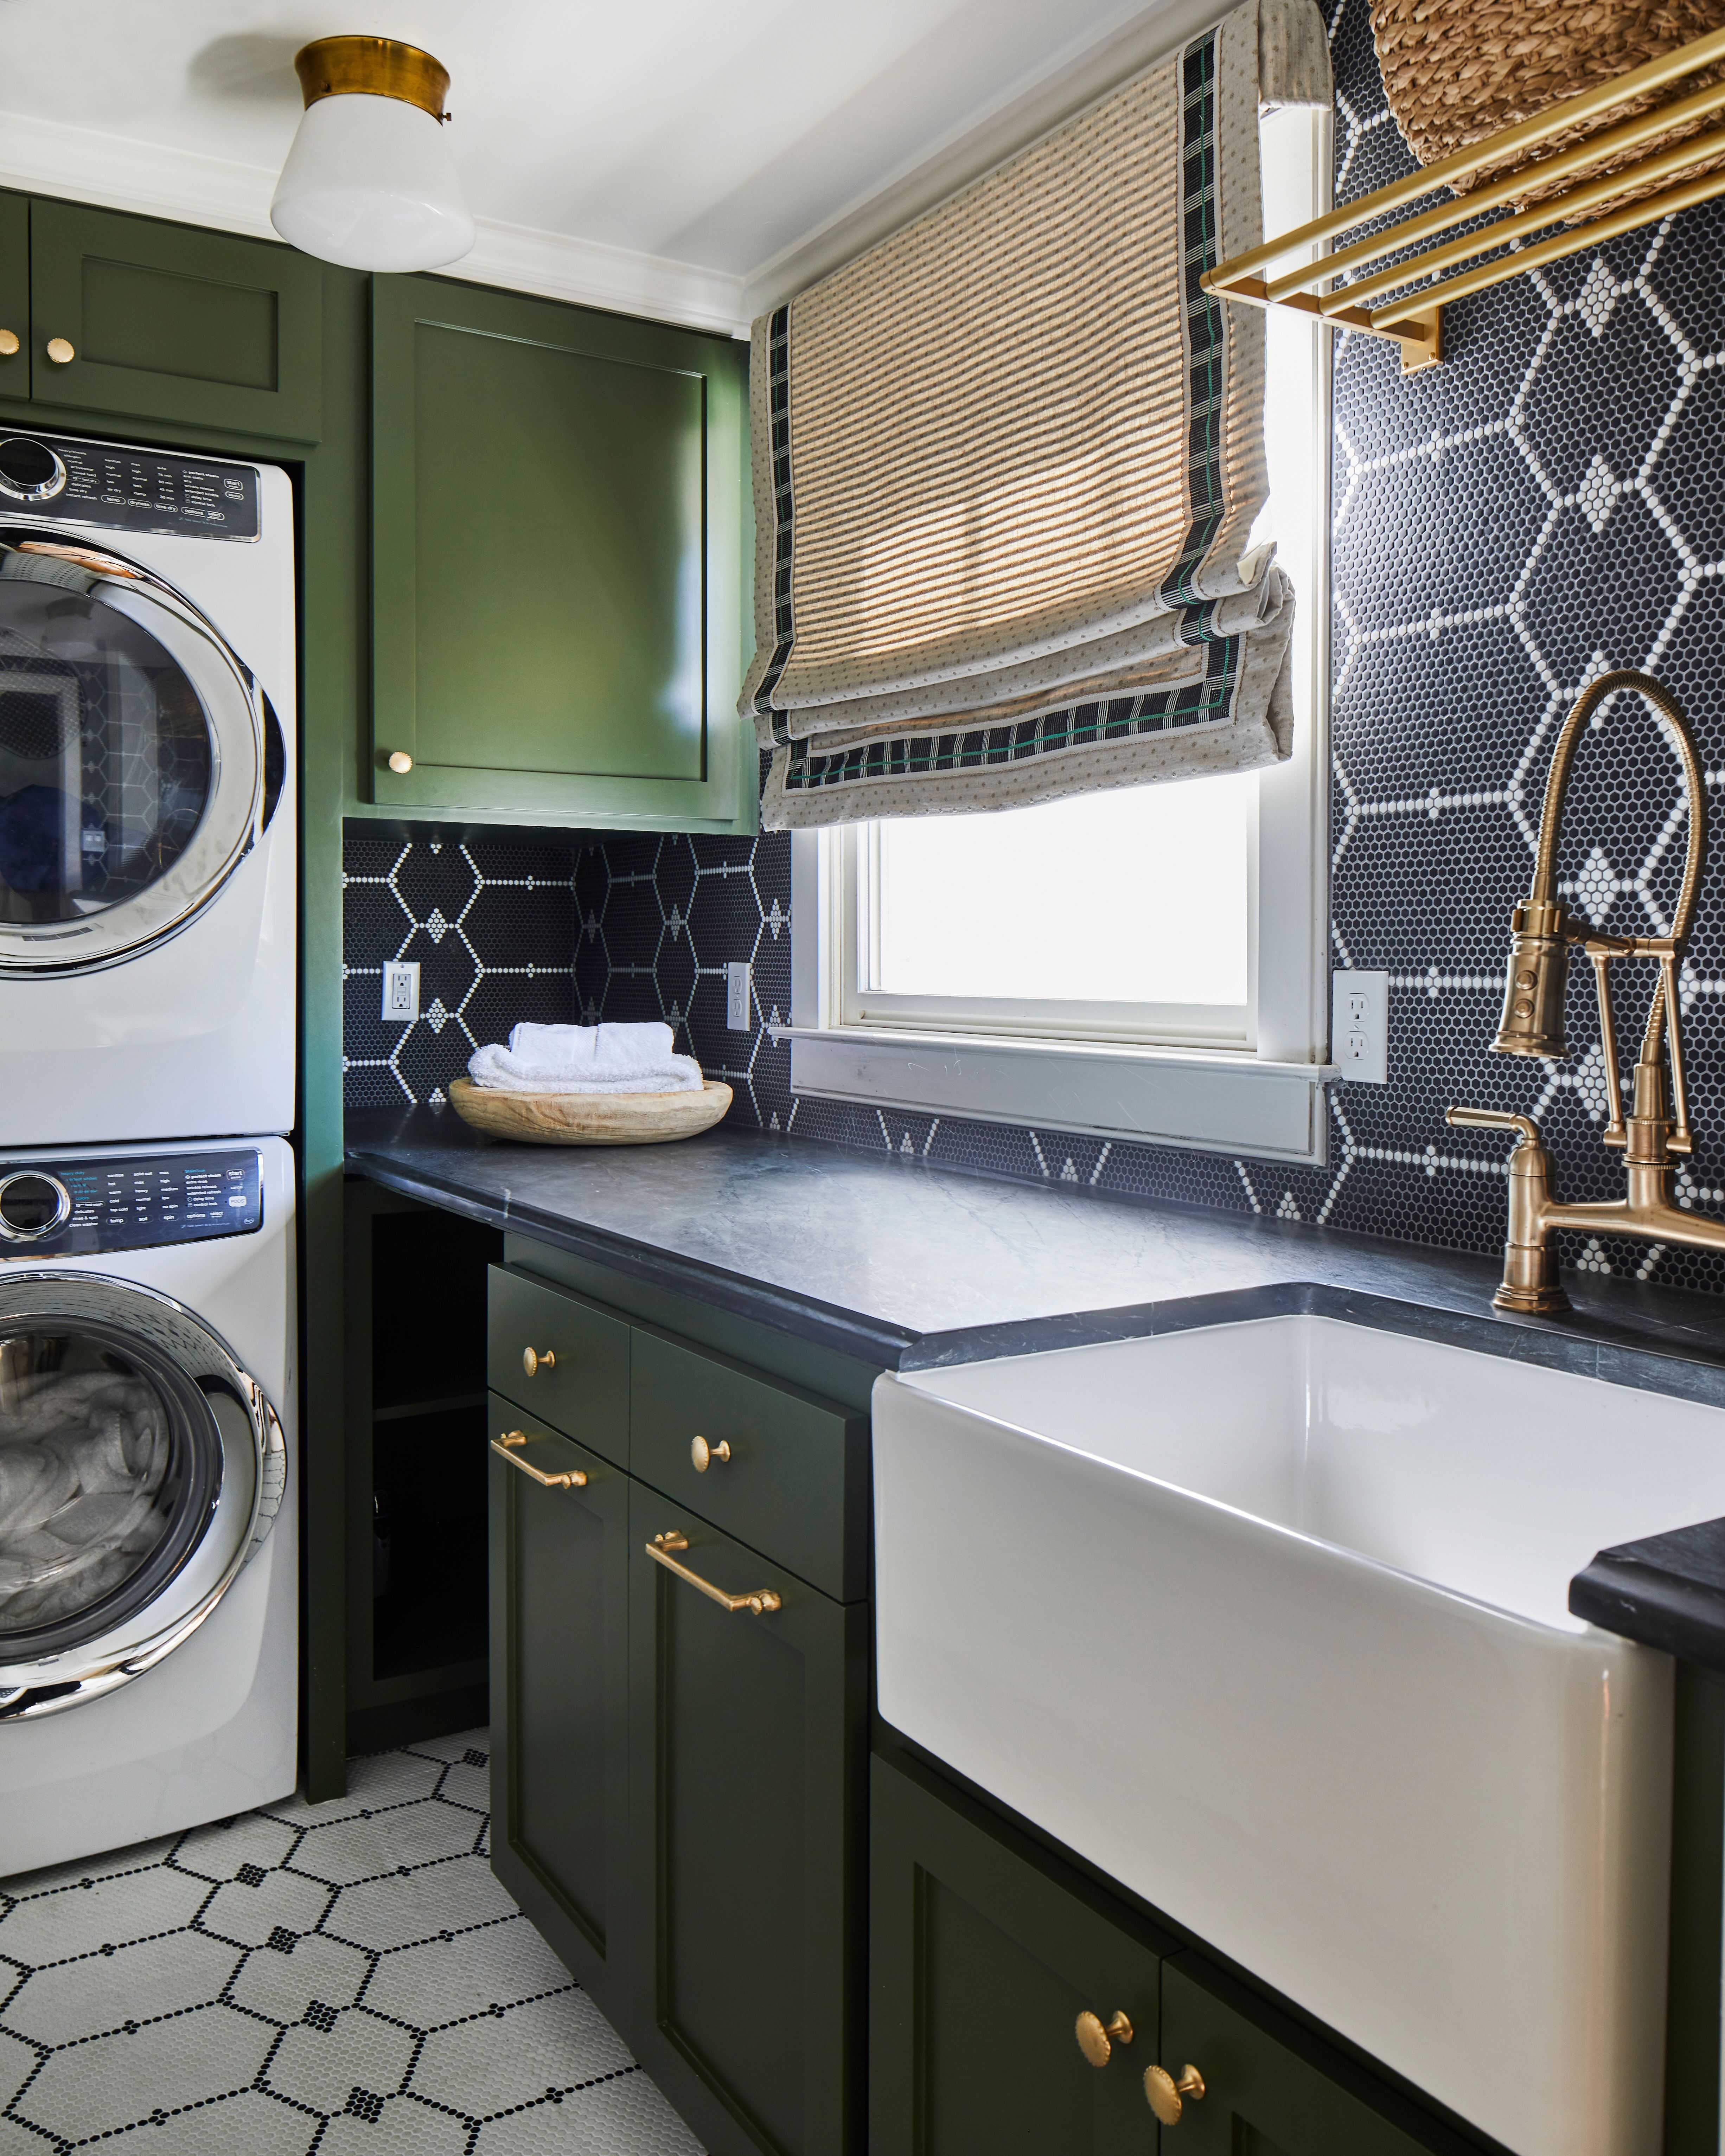 Bold Wallpaper Brings Color and Fun to the Laundry Room